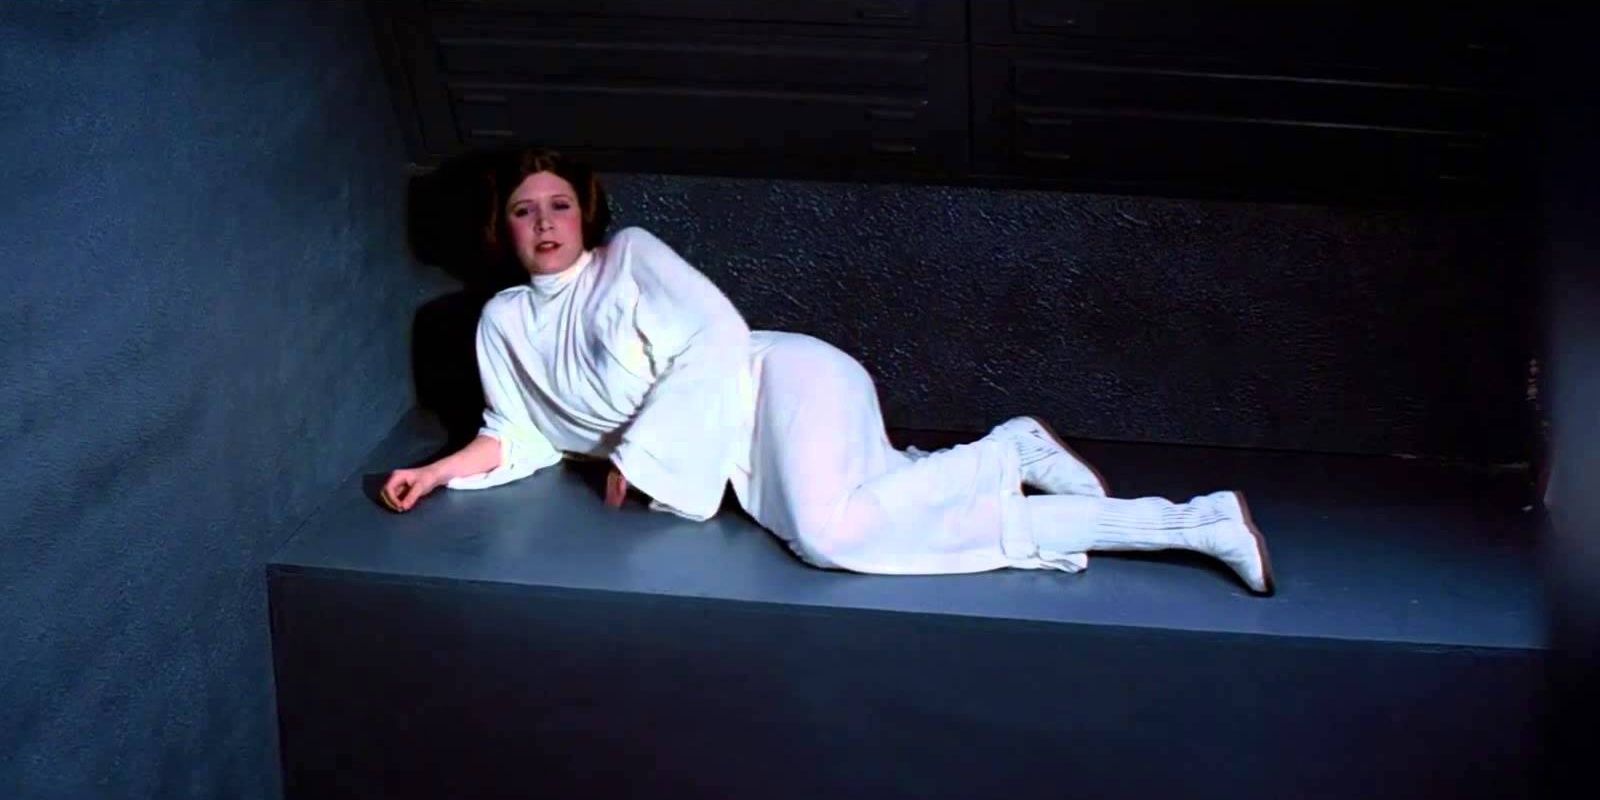 Princess Leia Organa in her cell before getting rescued by uke Skywalker in A New Hope